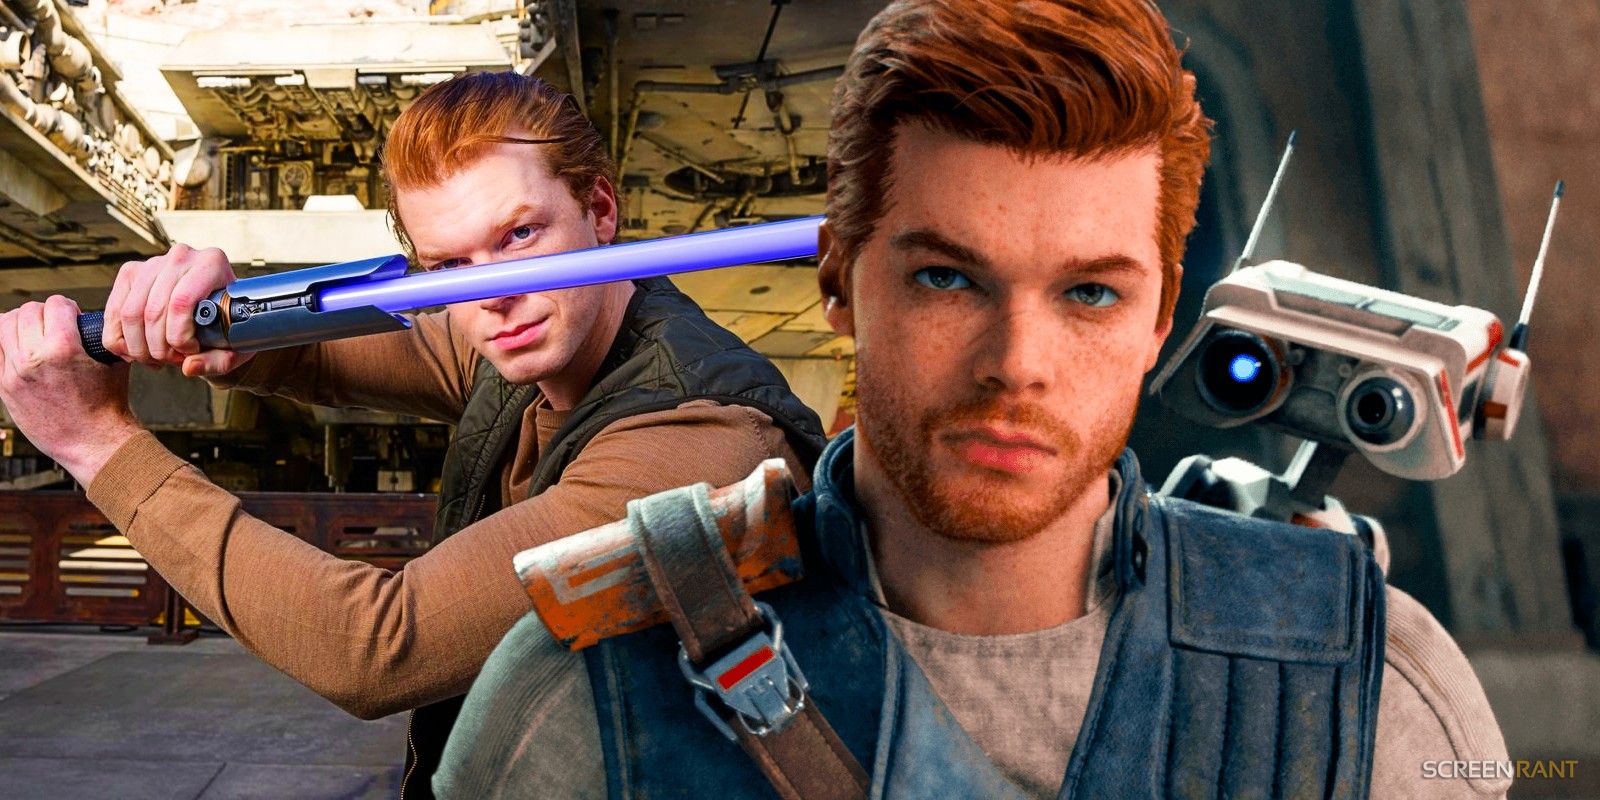 LiveAction Cal Kestis Appearance Is Not Cameron Monaghan's Star Wars